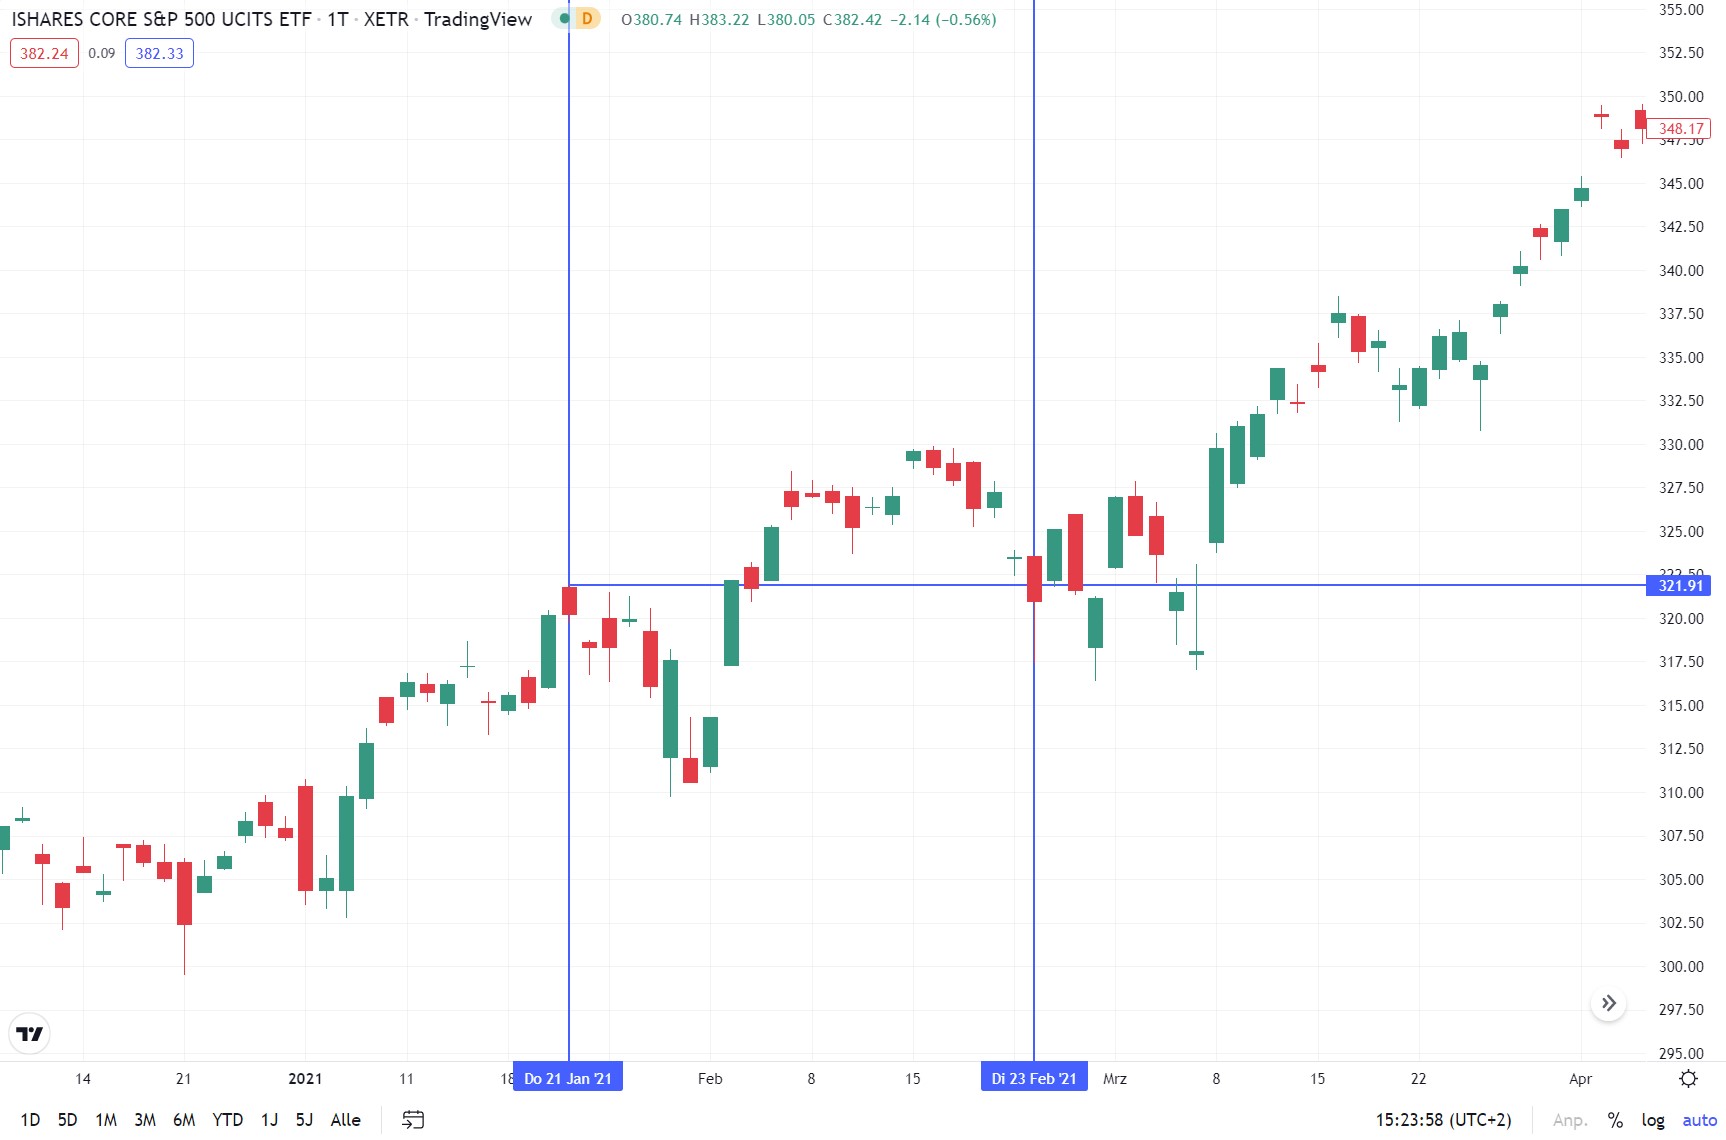 A Buy Limit example: The stock market is in a stable uptrend and you want to buy a position in the S&P 500 ETF. However, you are currently (08.02.2021) of the opinion that the price is too high and would like to buy automatically in the next correction at a fixed price. The price is currently at €327.10 and you think that the next correction will go to the previous high at €321.61. So, you place your Buy Limit at a rate of €321.61 with unlimited validity (GTC). After two weeks, on February 23, 2021, the limit price will be reached and the order will be executed automatically. Your position is opened.